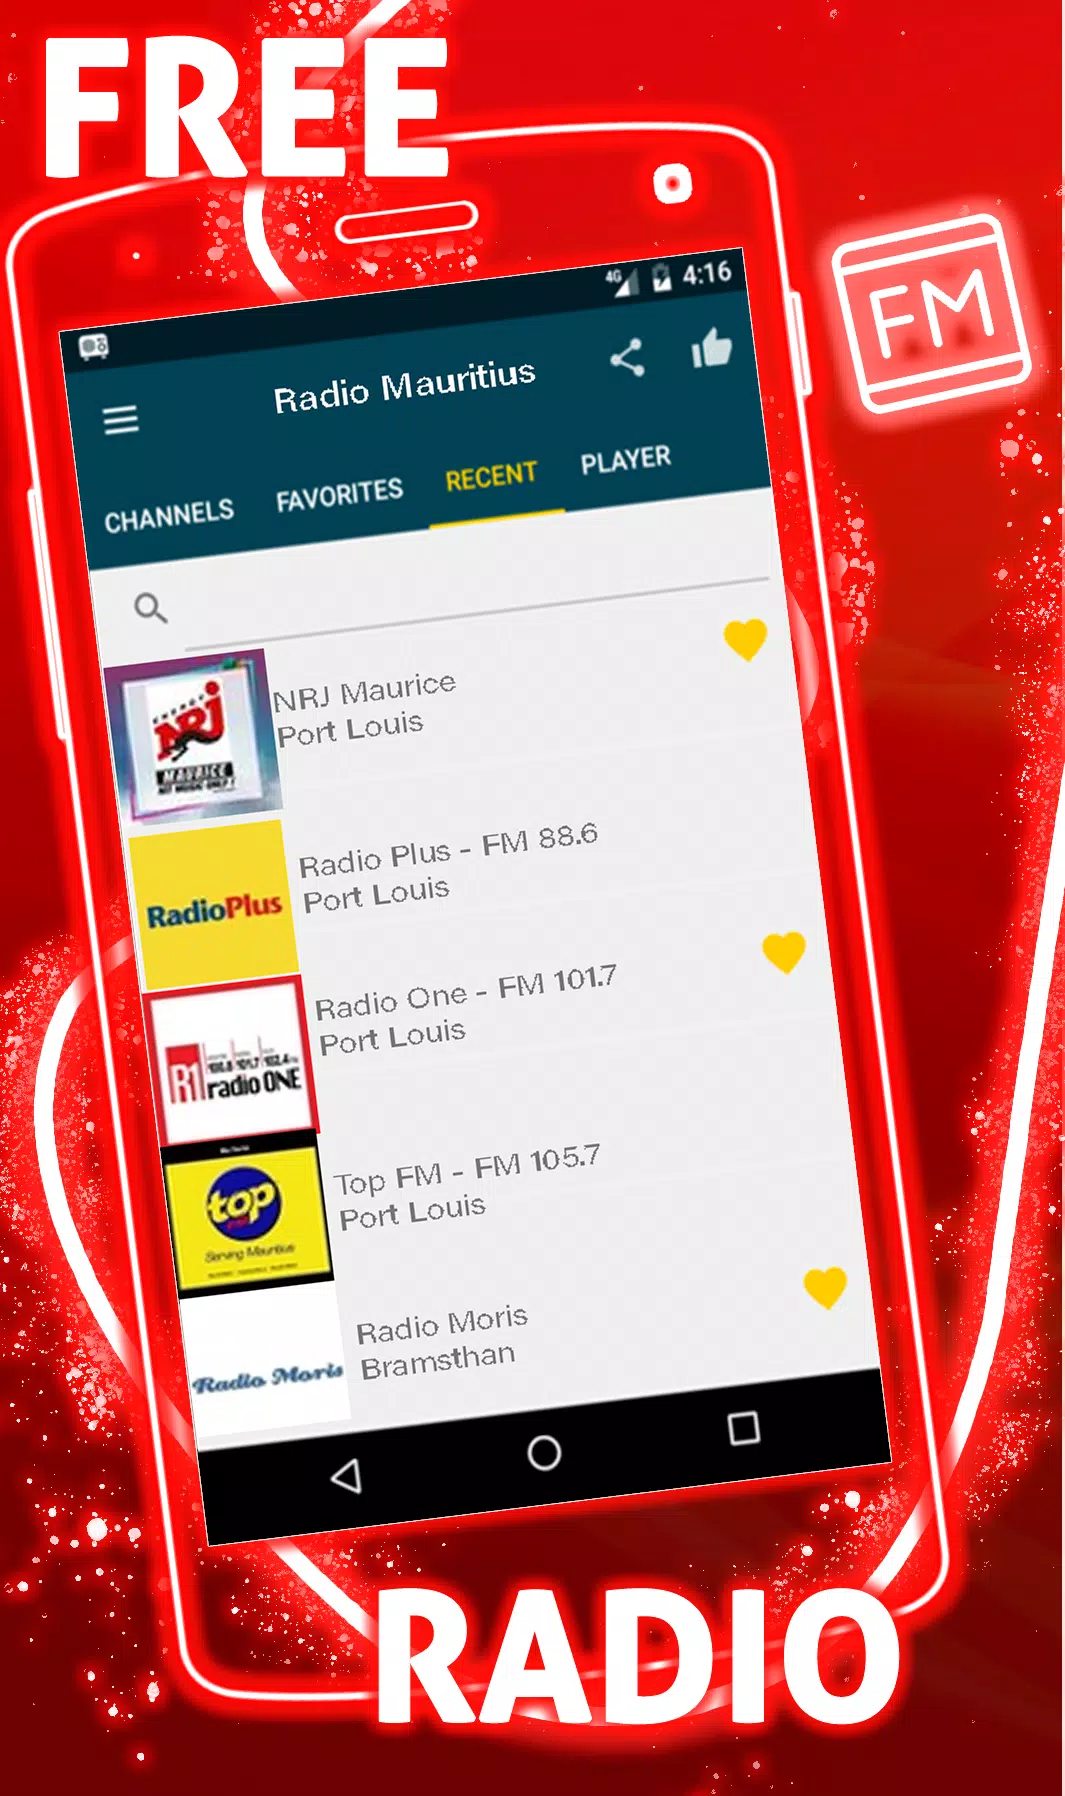 Radio Mauritius for Android - APK Download